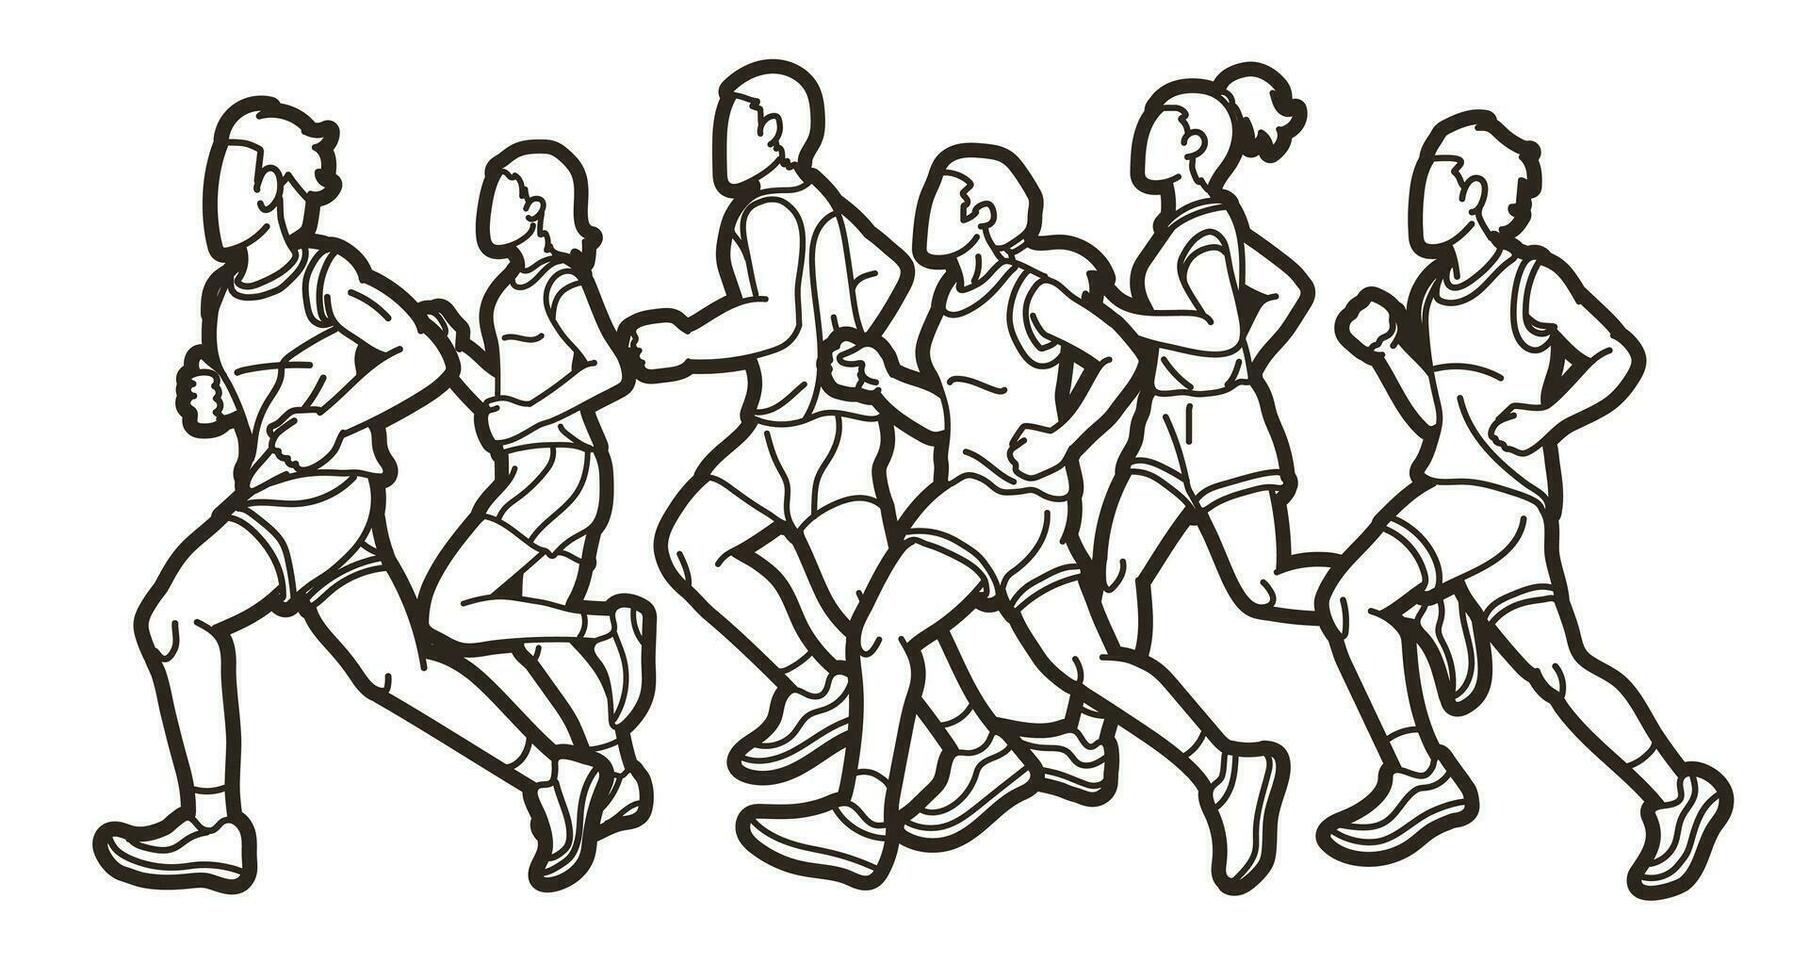 Group of People Running Together Cartoon Sport Graphic Vector